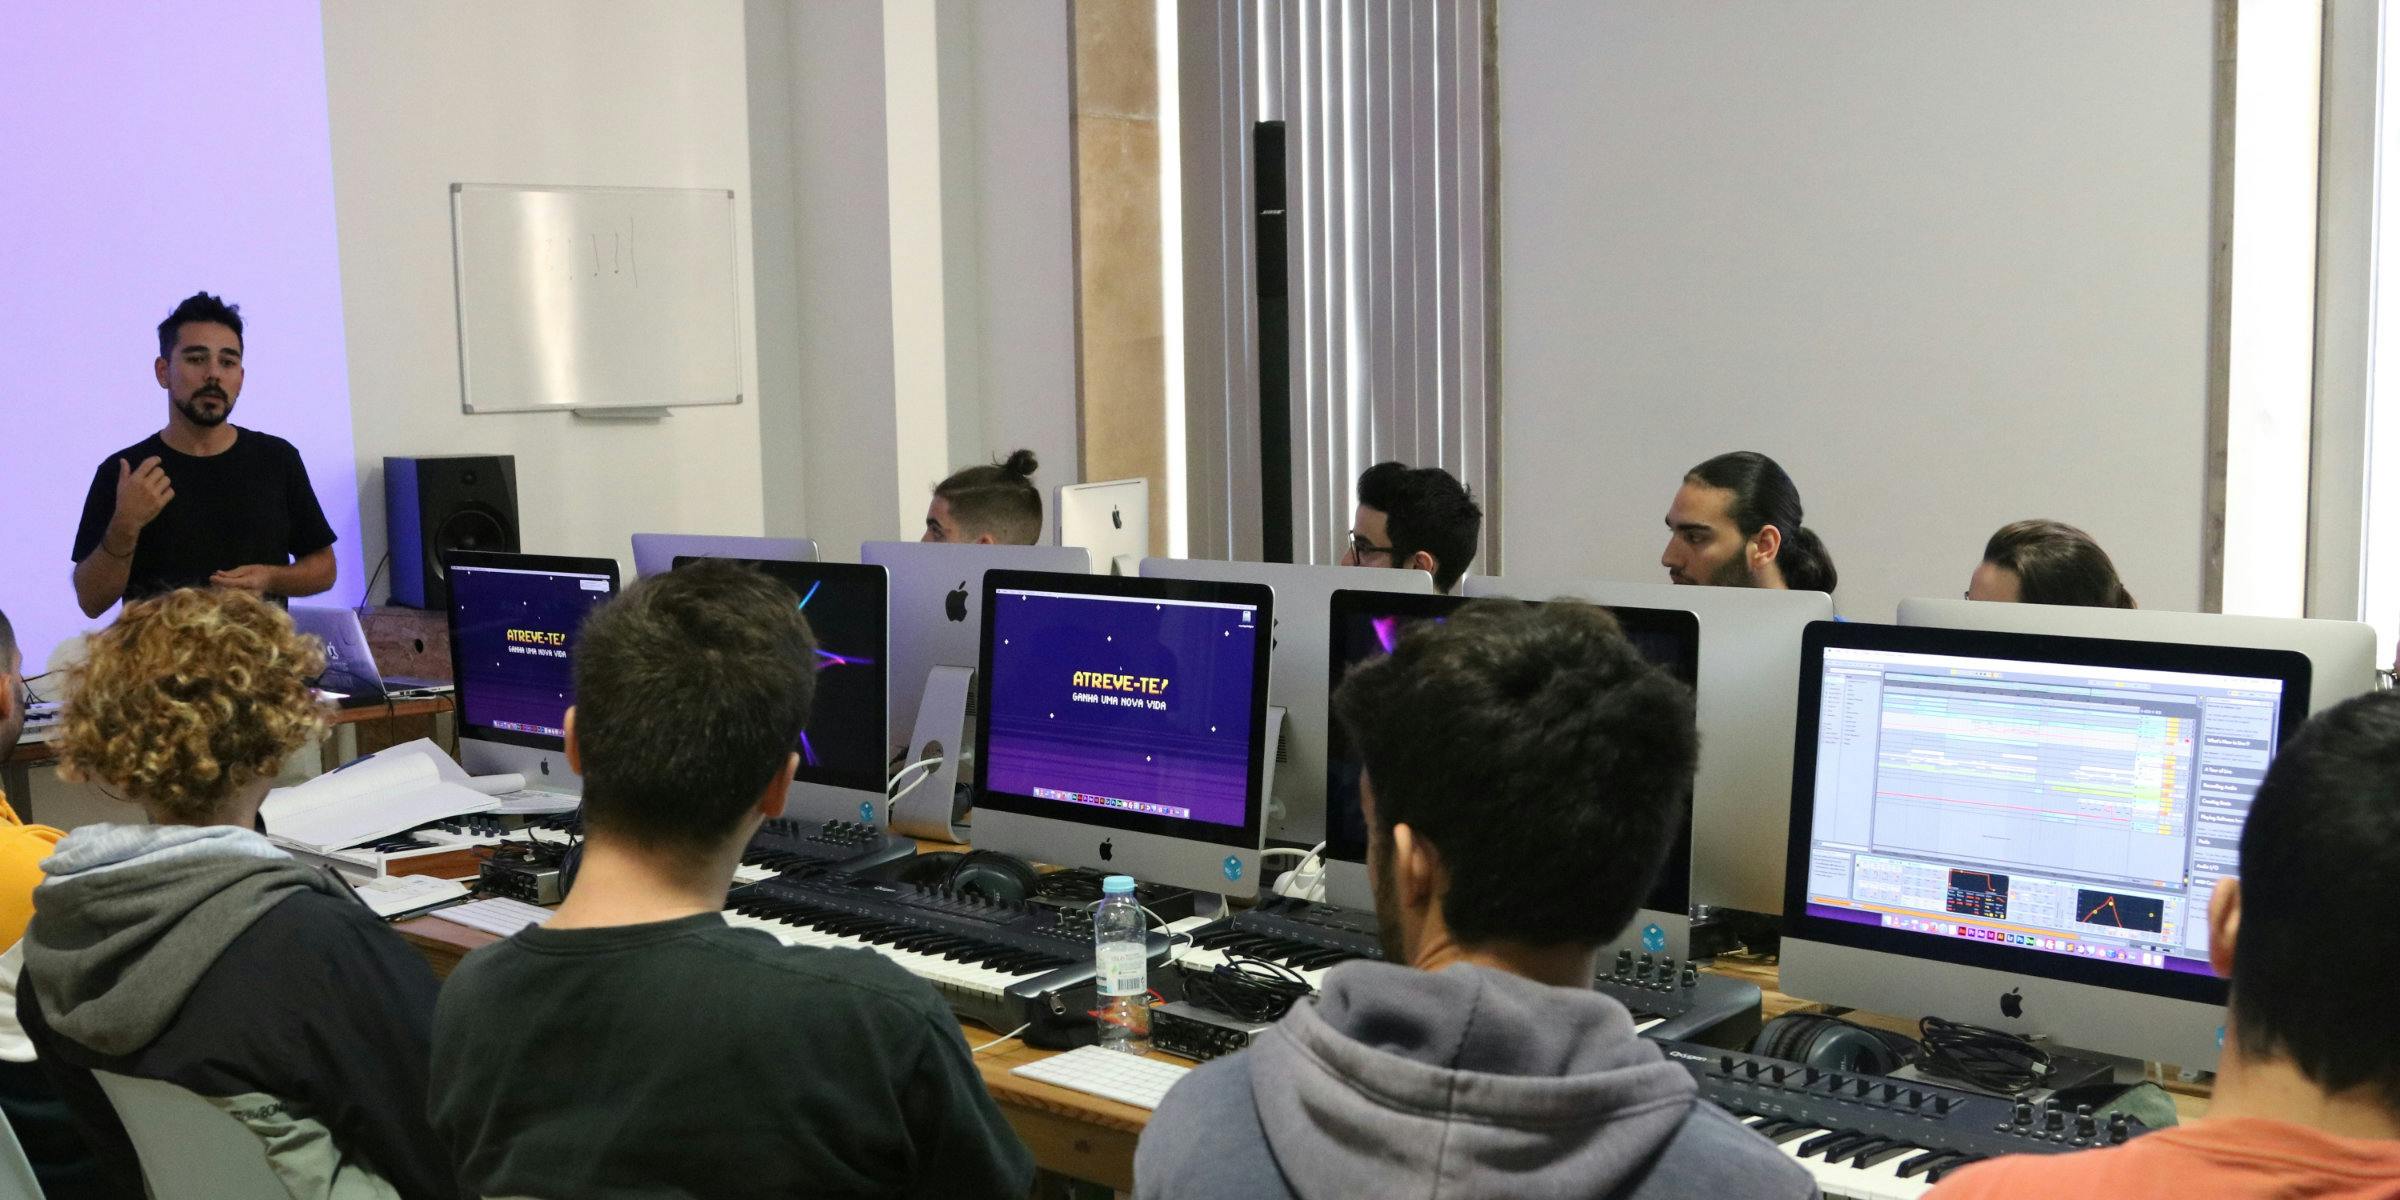 Imaginando being used in music production course with student discount program